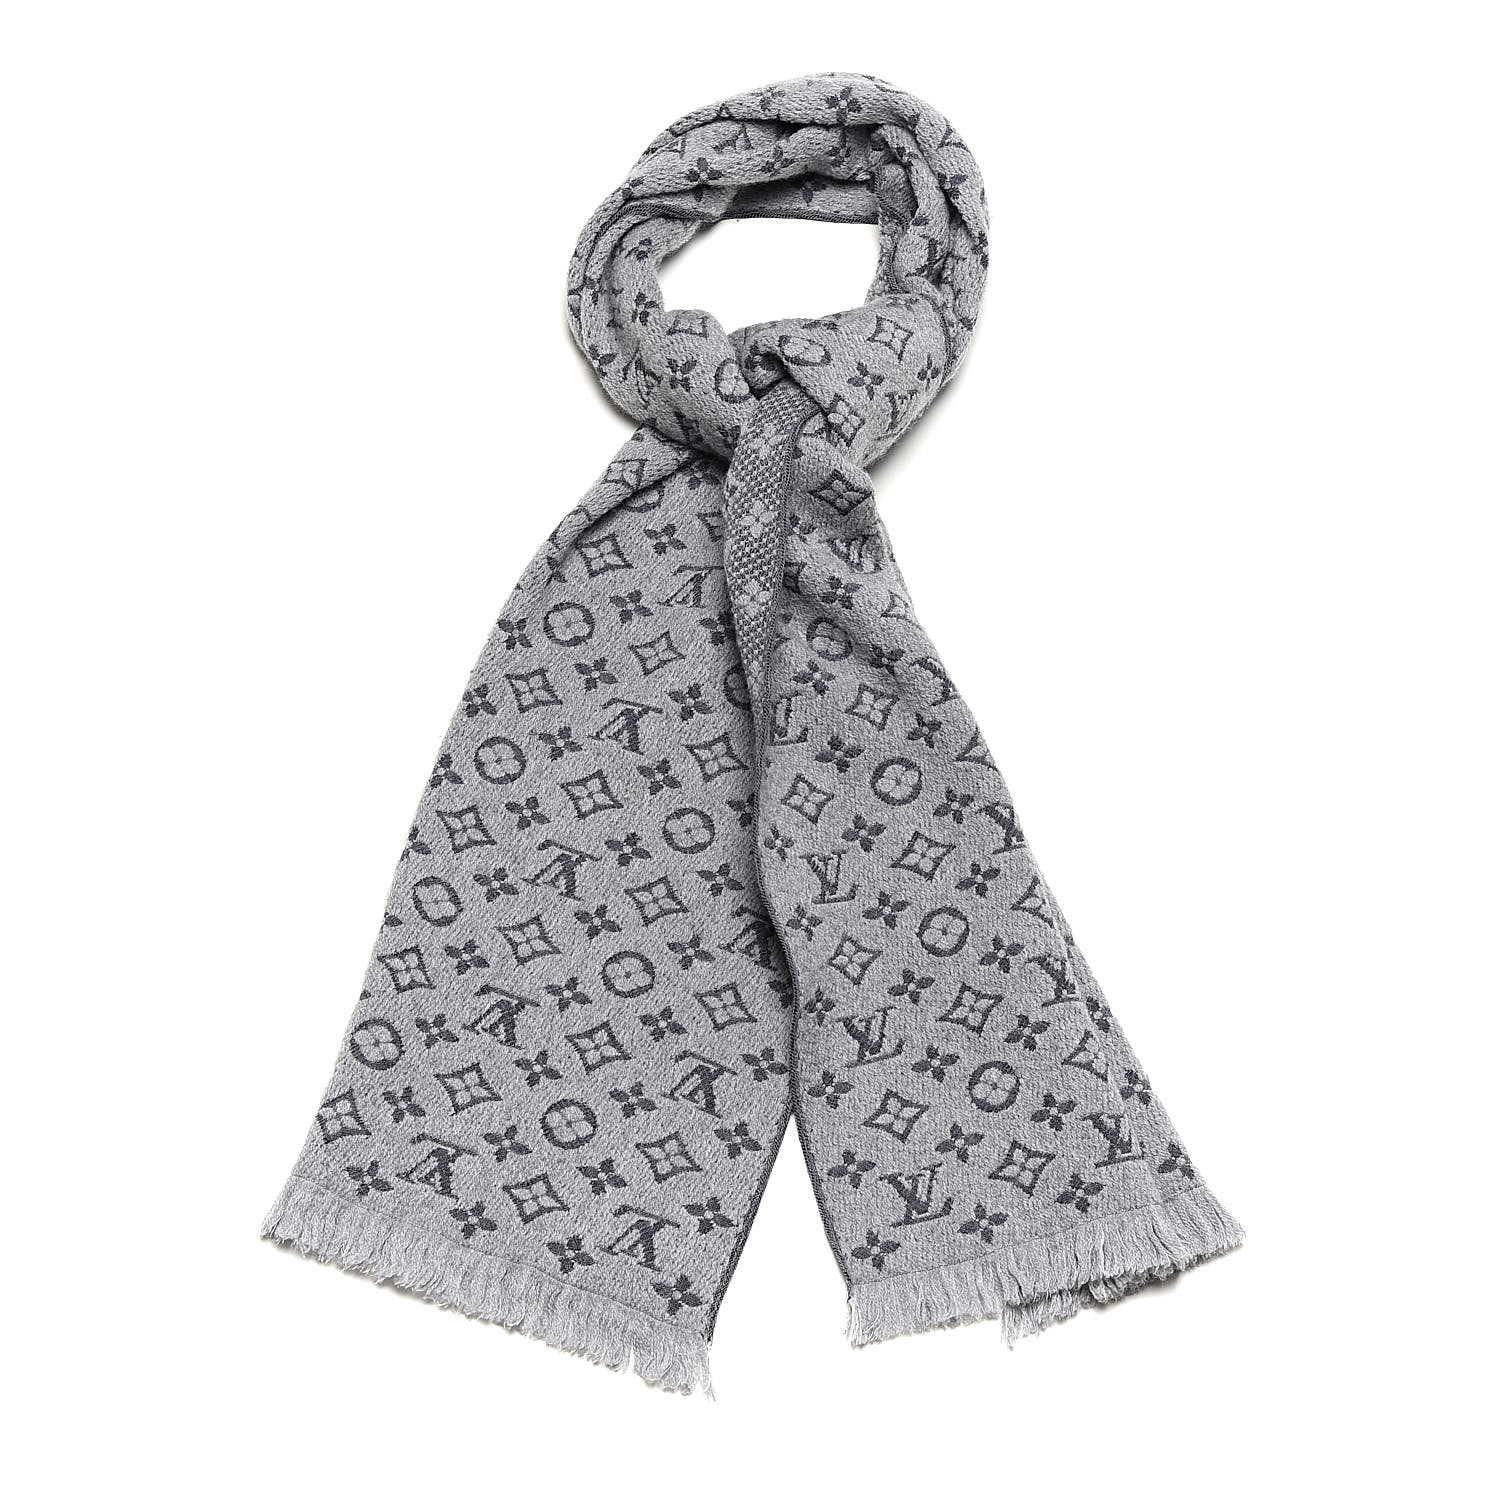 Auth Louis Vuitton Grey "Columbia" Cable Knit Muffler Wool Scarf  w/ LV Monogram